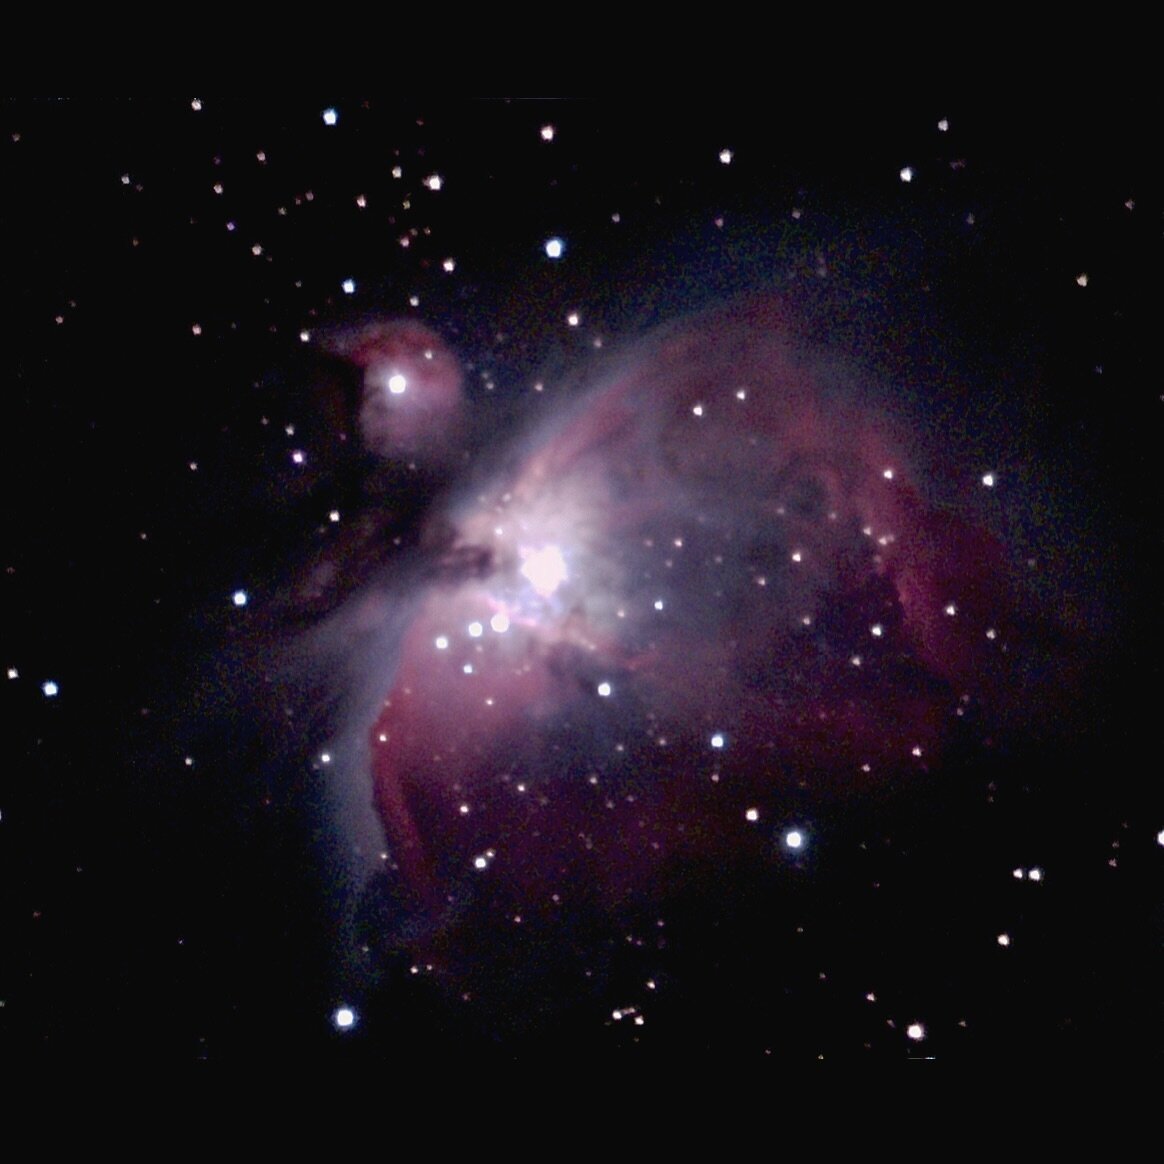 🌌 Nebulae (nehb-yuh&middot;lee), like the Great Orion Nebula (pictured), are vast clouds of gas and dust where stars are born. ✨ Located in the sword of Orion, this celestial object is a stellar nursery, giving birth to new stars and possibly planet